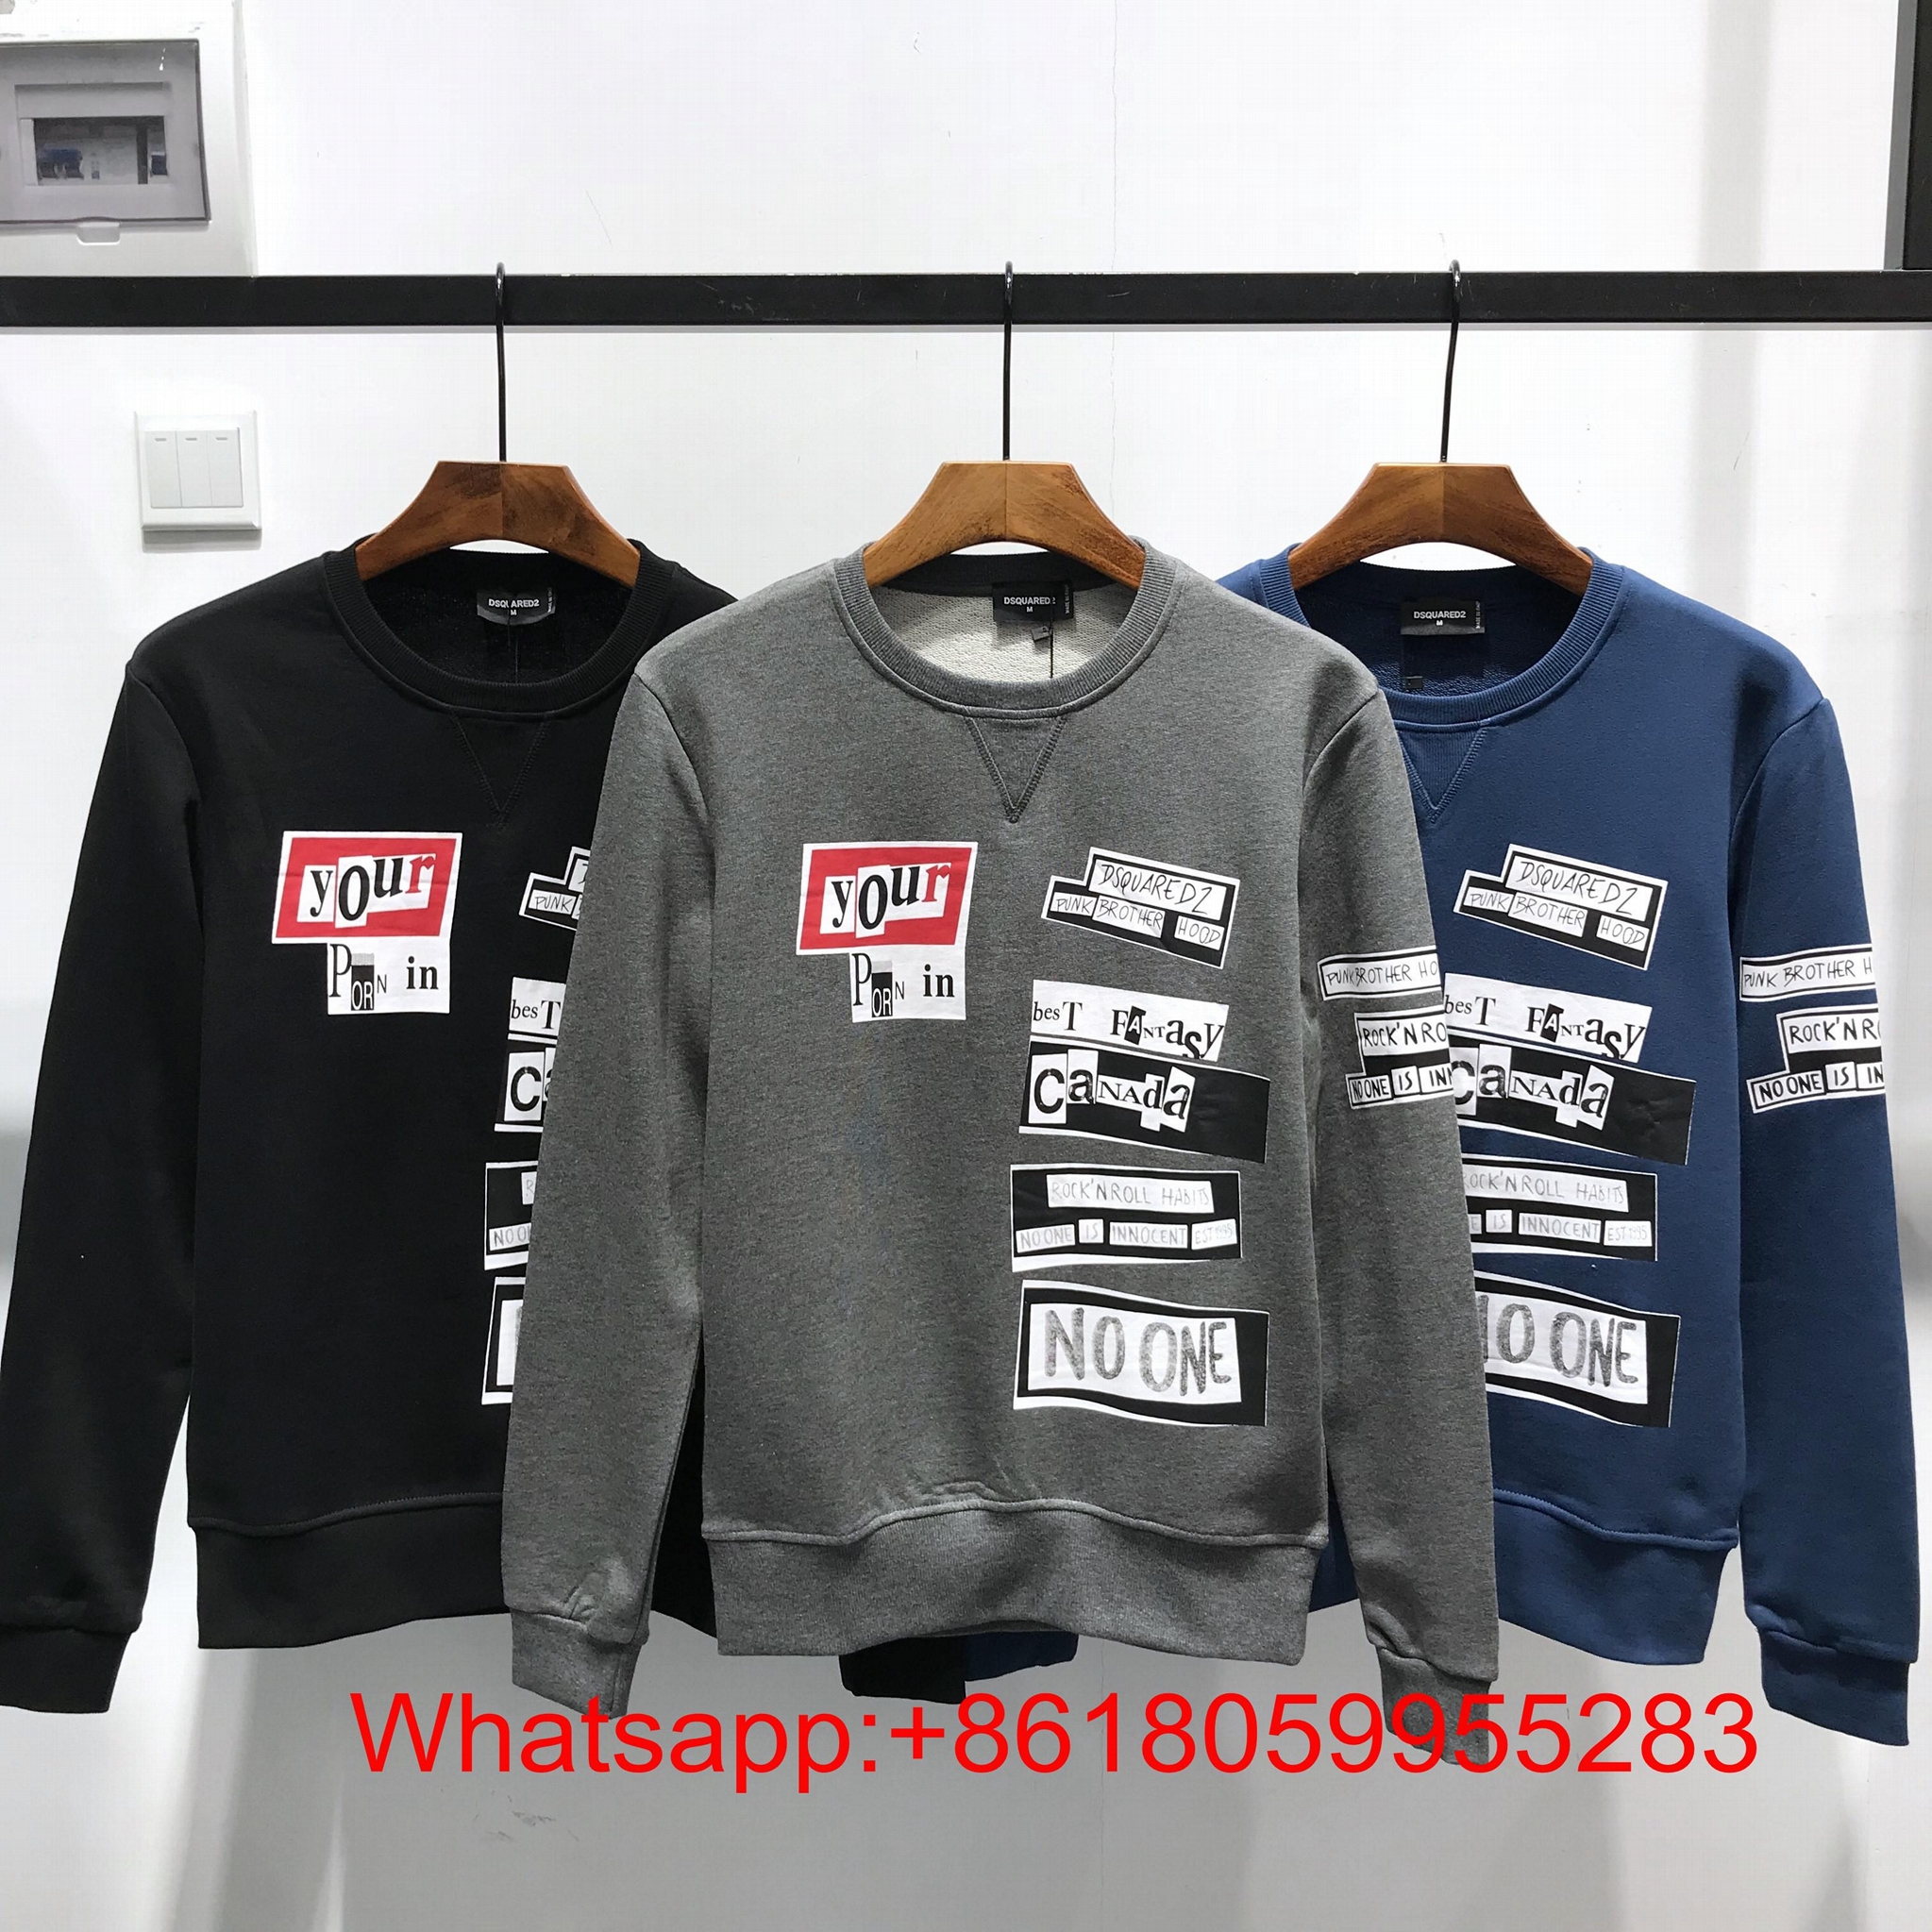 2019 Newest DSQ Brand DSQUARED2 hoodies Men winter jackets DSQUARED2 sweater